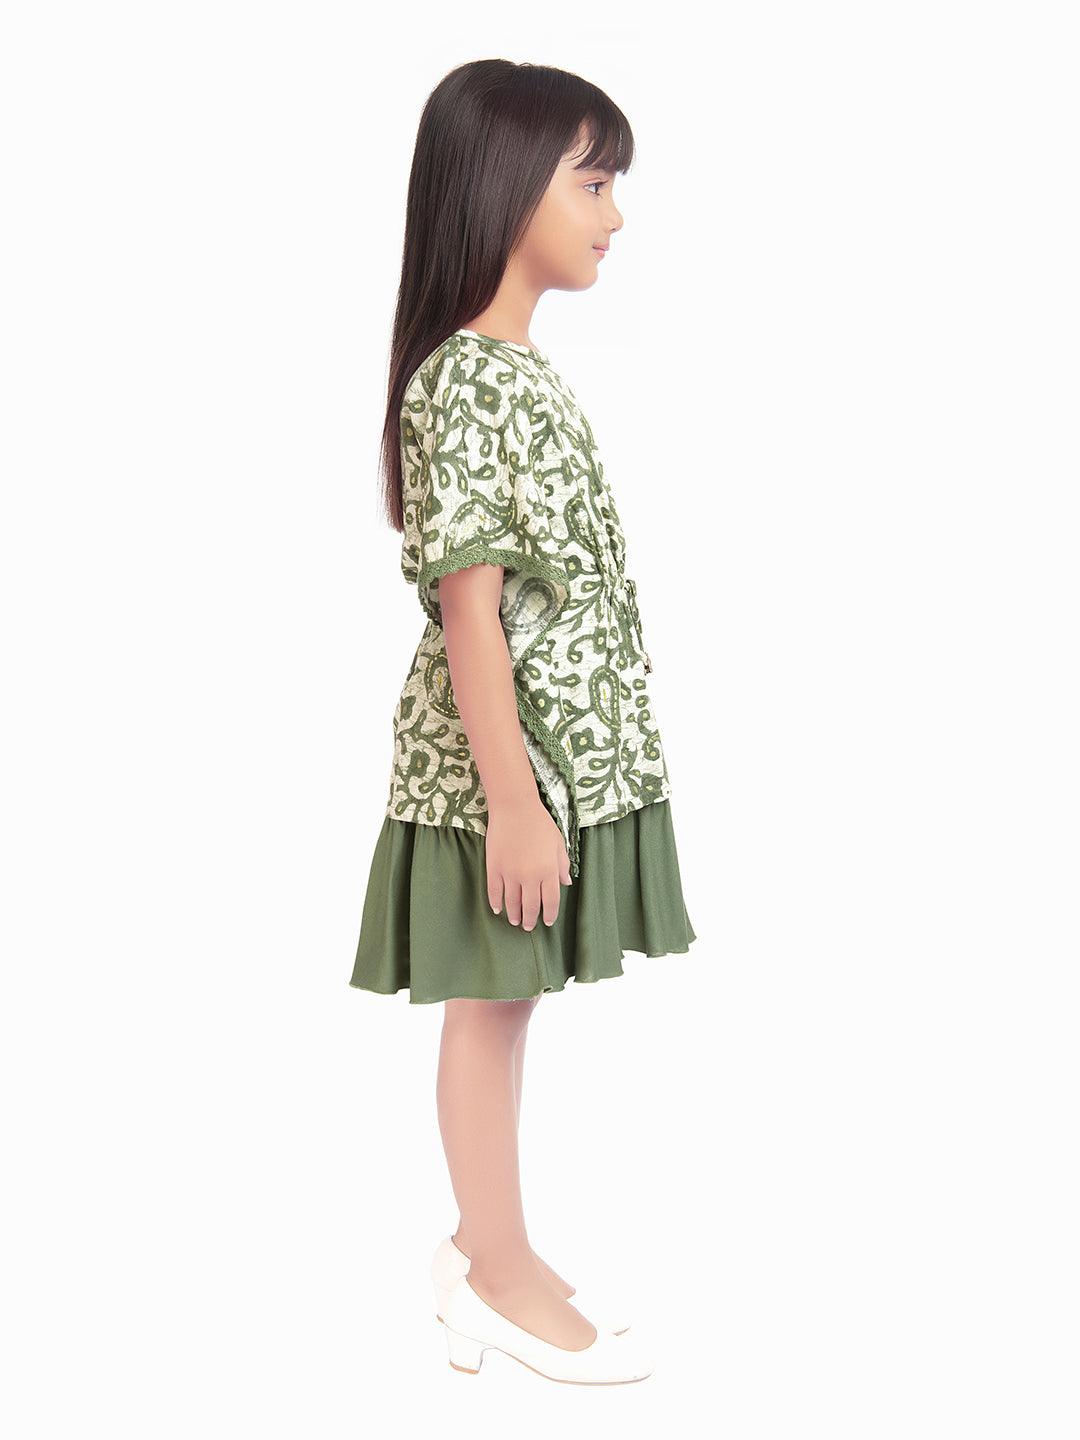 Floral Green Knee Length Dress - 2082 Green - TINY BABY INDIA shop.tinybaby.in